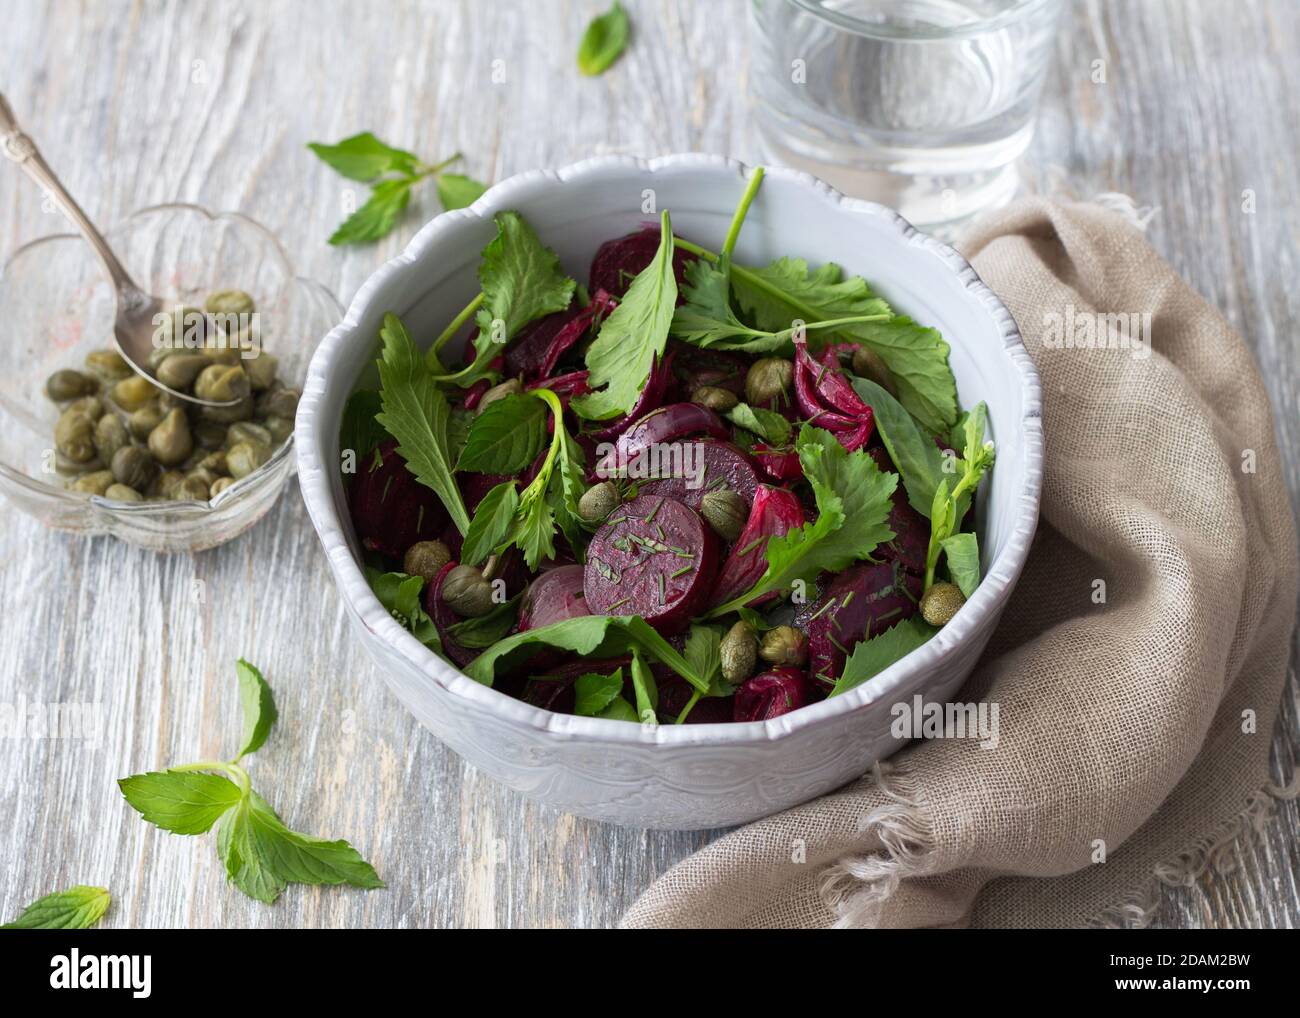 Beetroot salad with baked red onion, capers, watercress, greens and vinaigrette sauce. Vegan healthy food. In a blue bowl on a wooden table Stock Photo